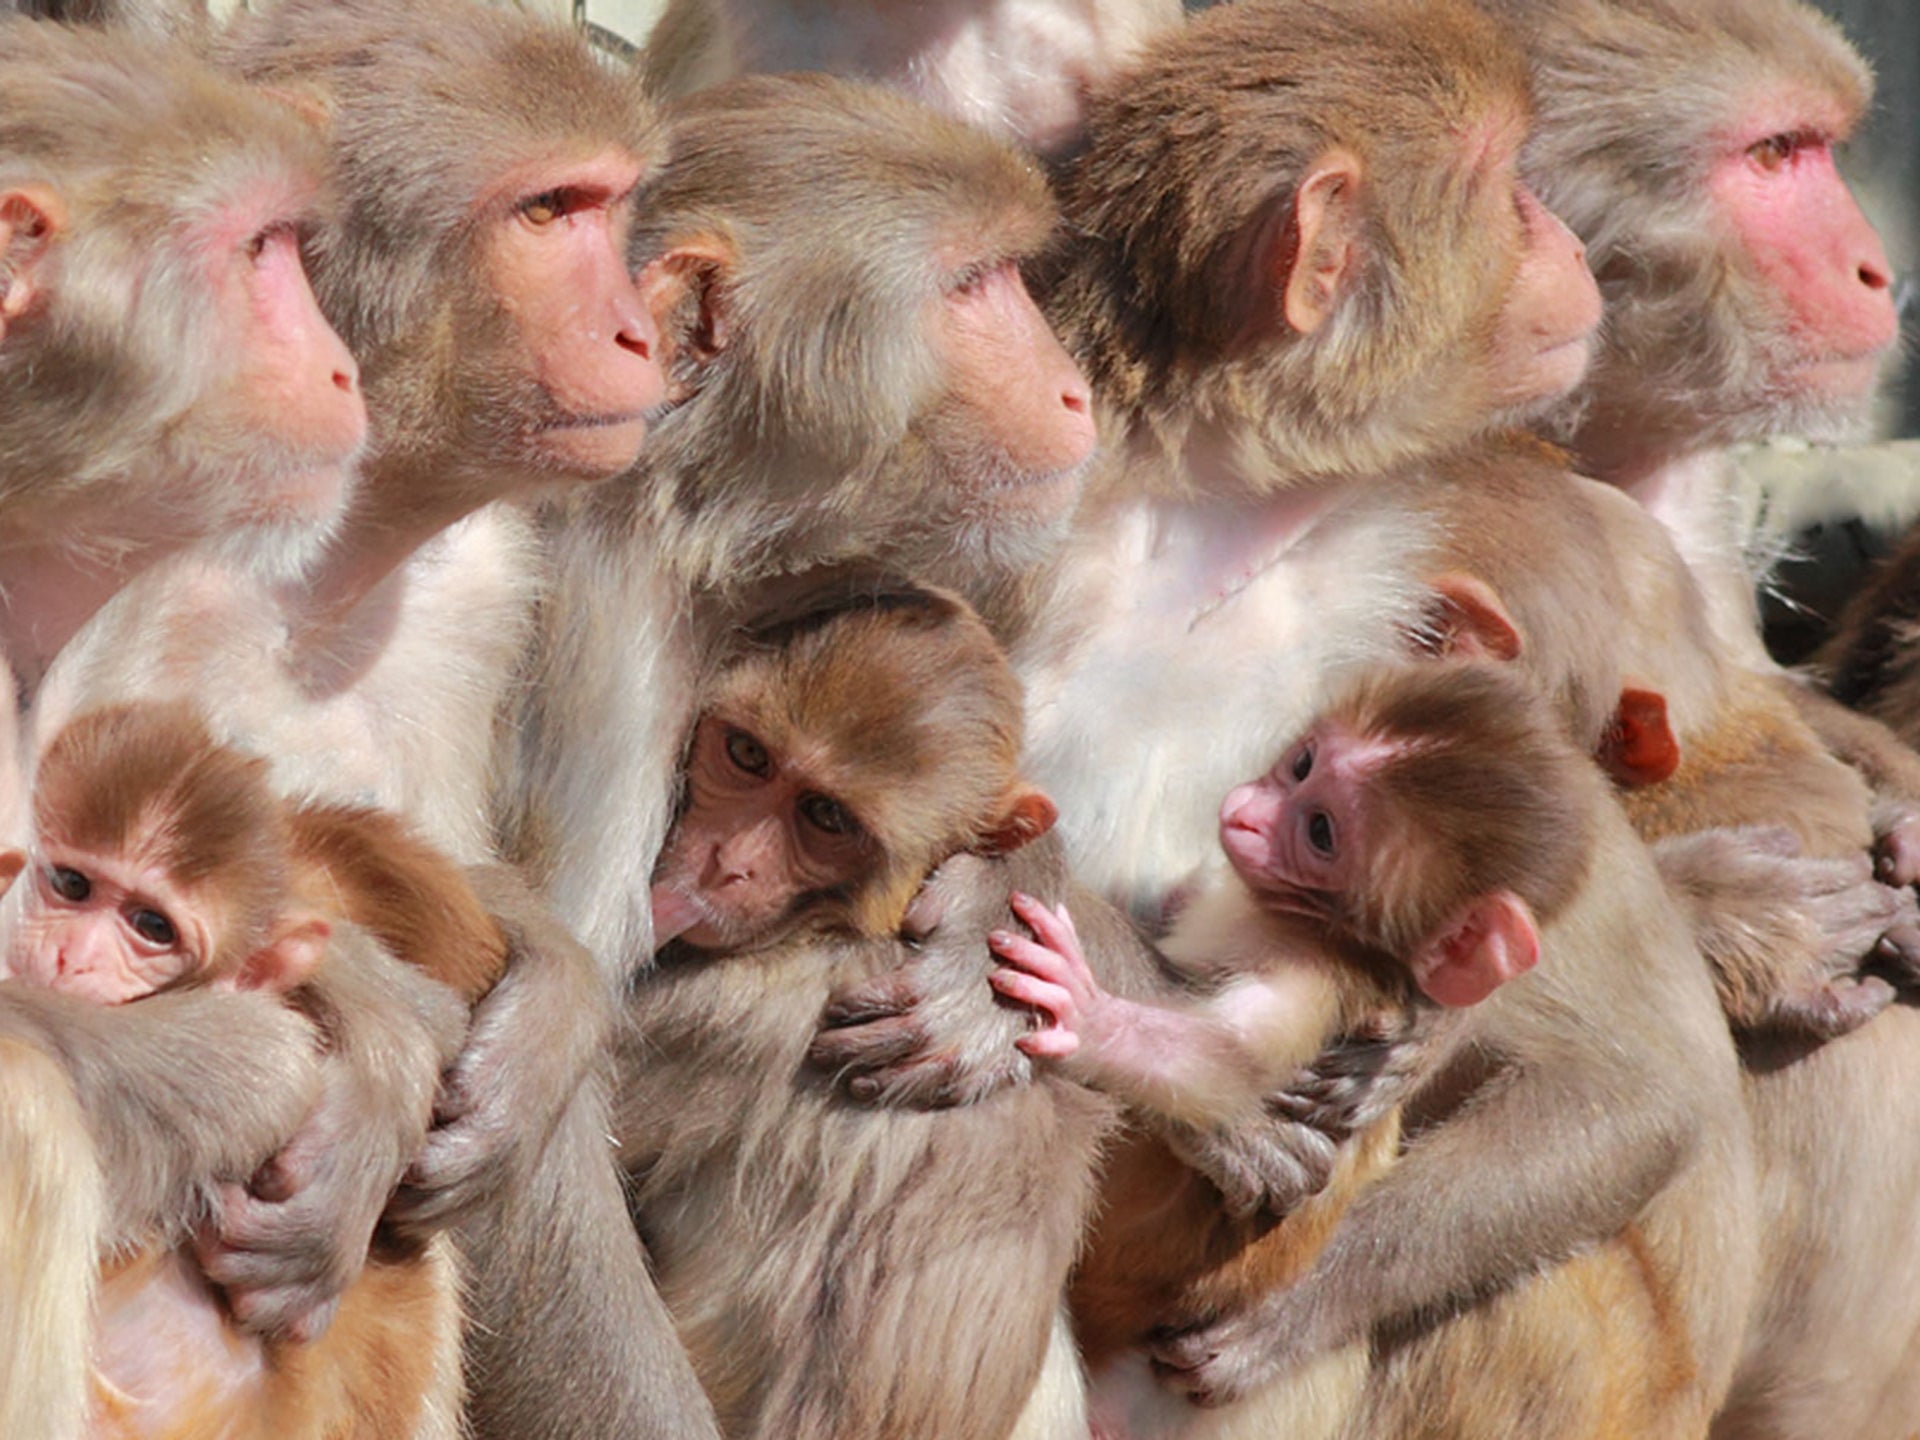 Female rhesus macaque monkeys and infants at the California National Primate Research Center at UC Davis.